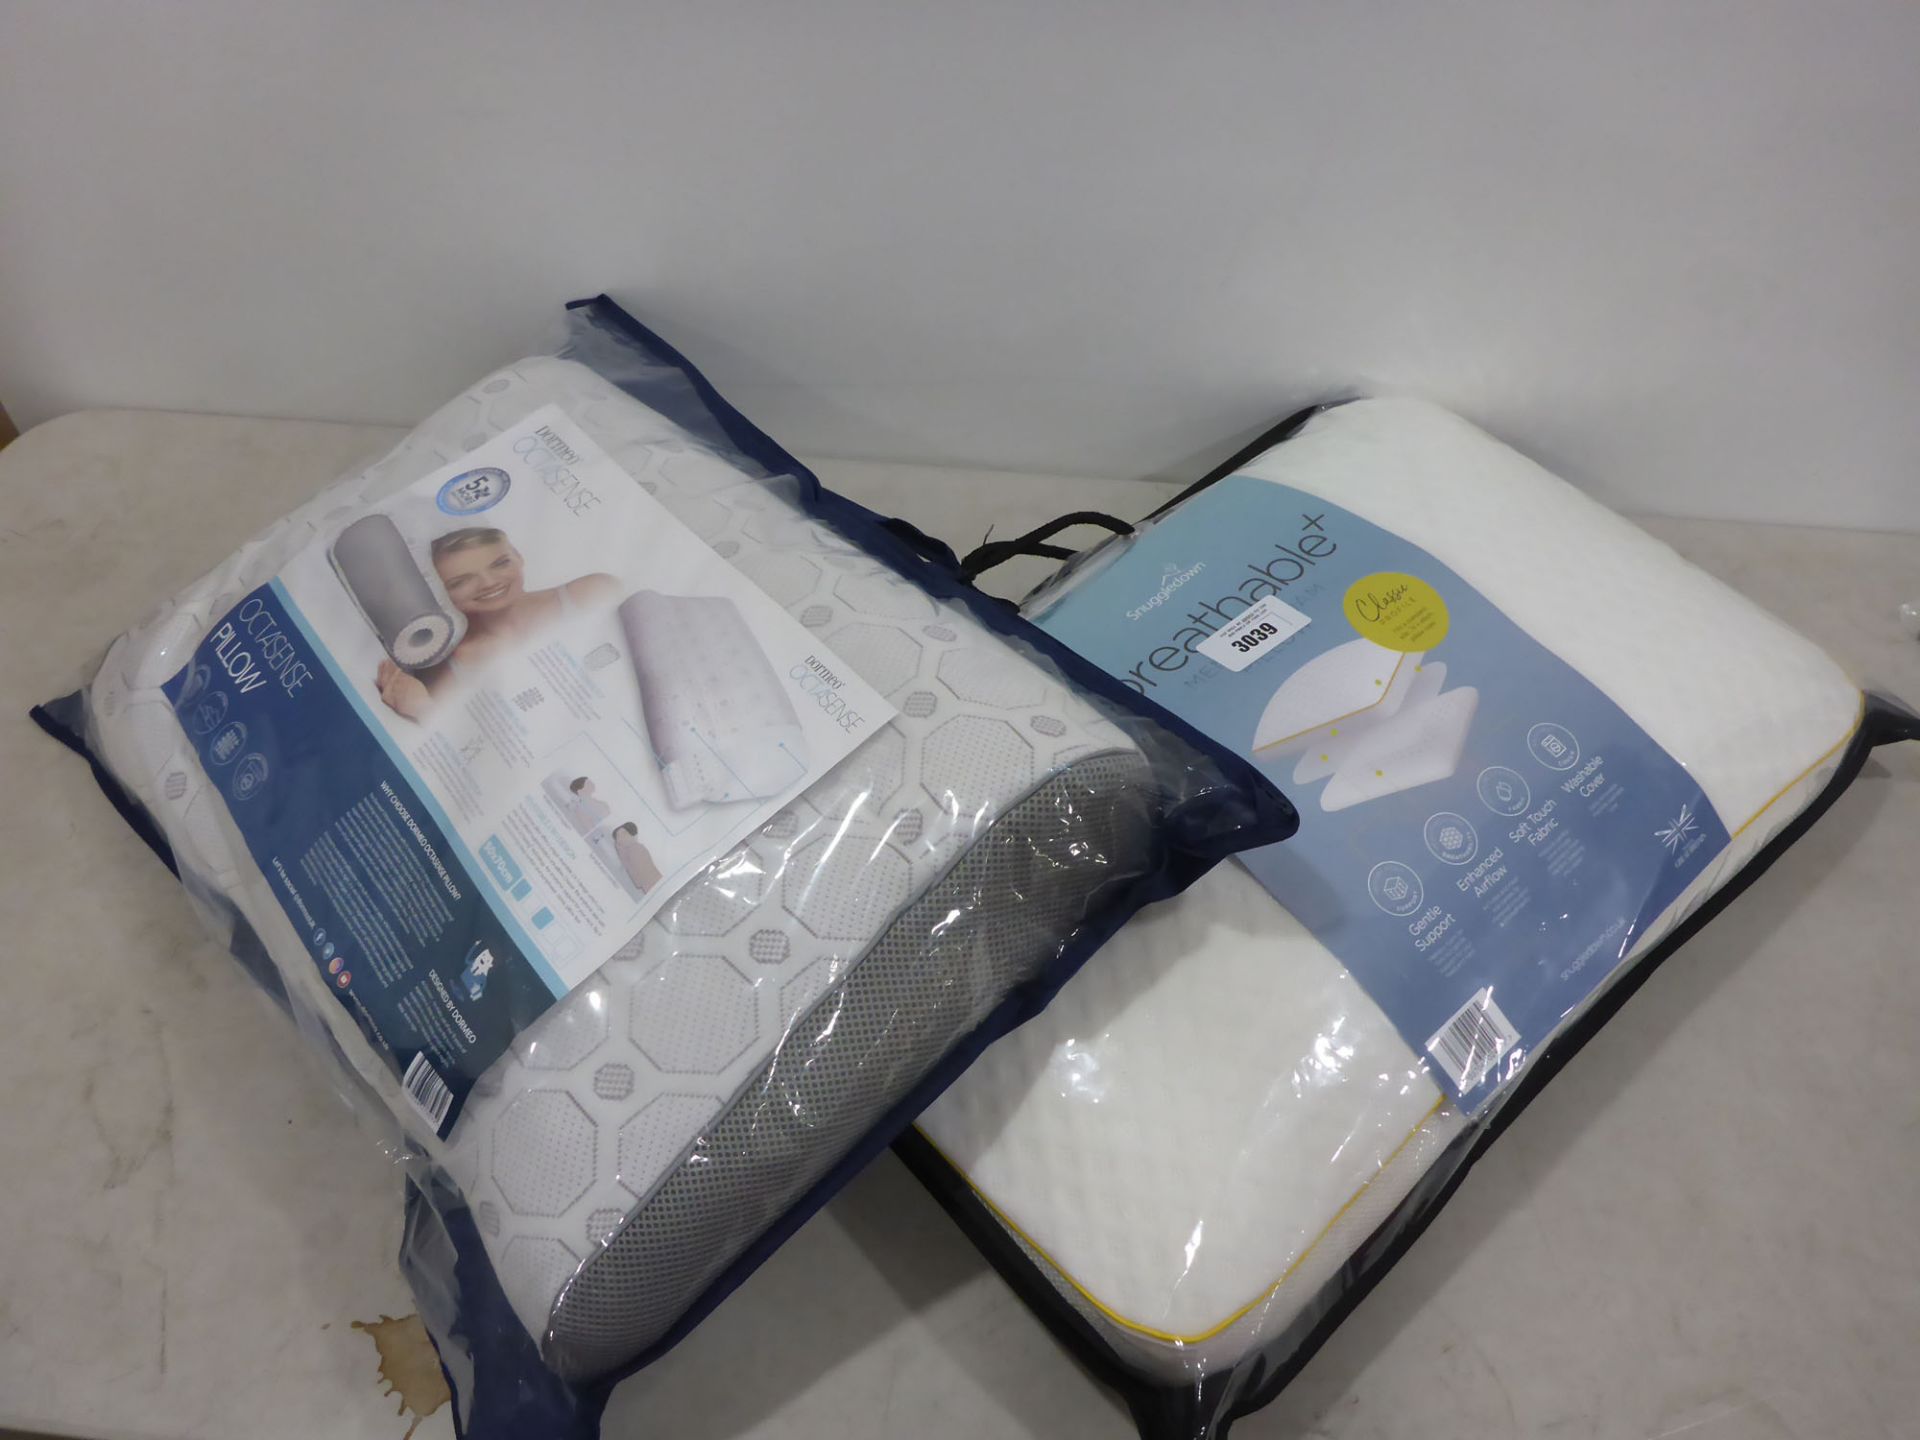 Bagged Dormeo octasense pillow with a snuggle down breathable pillow